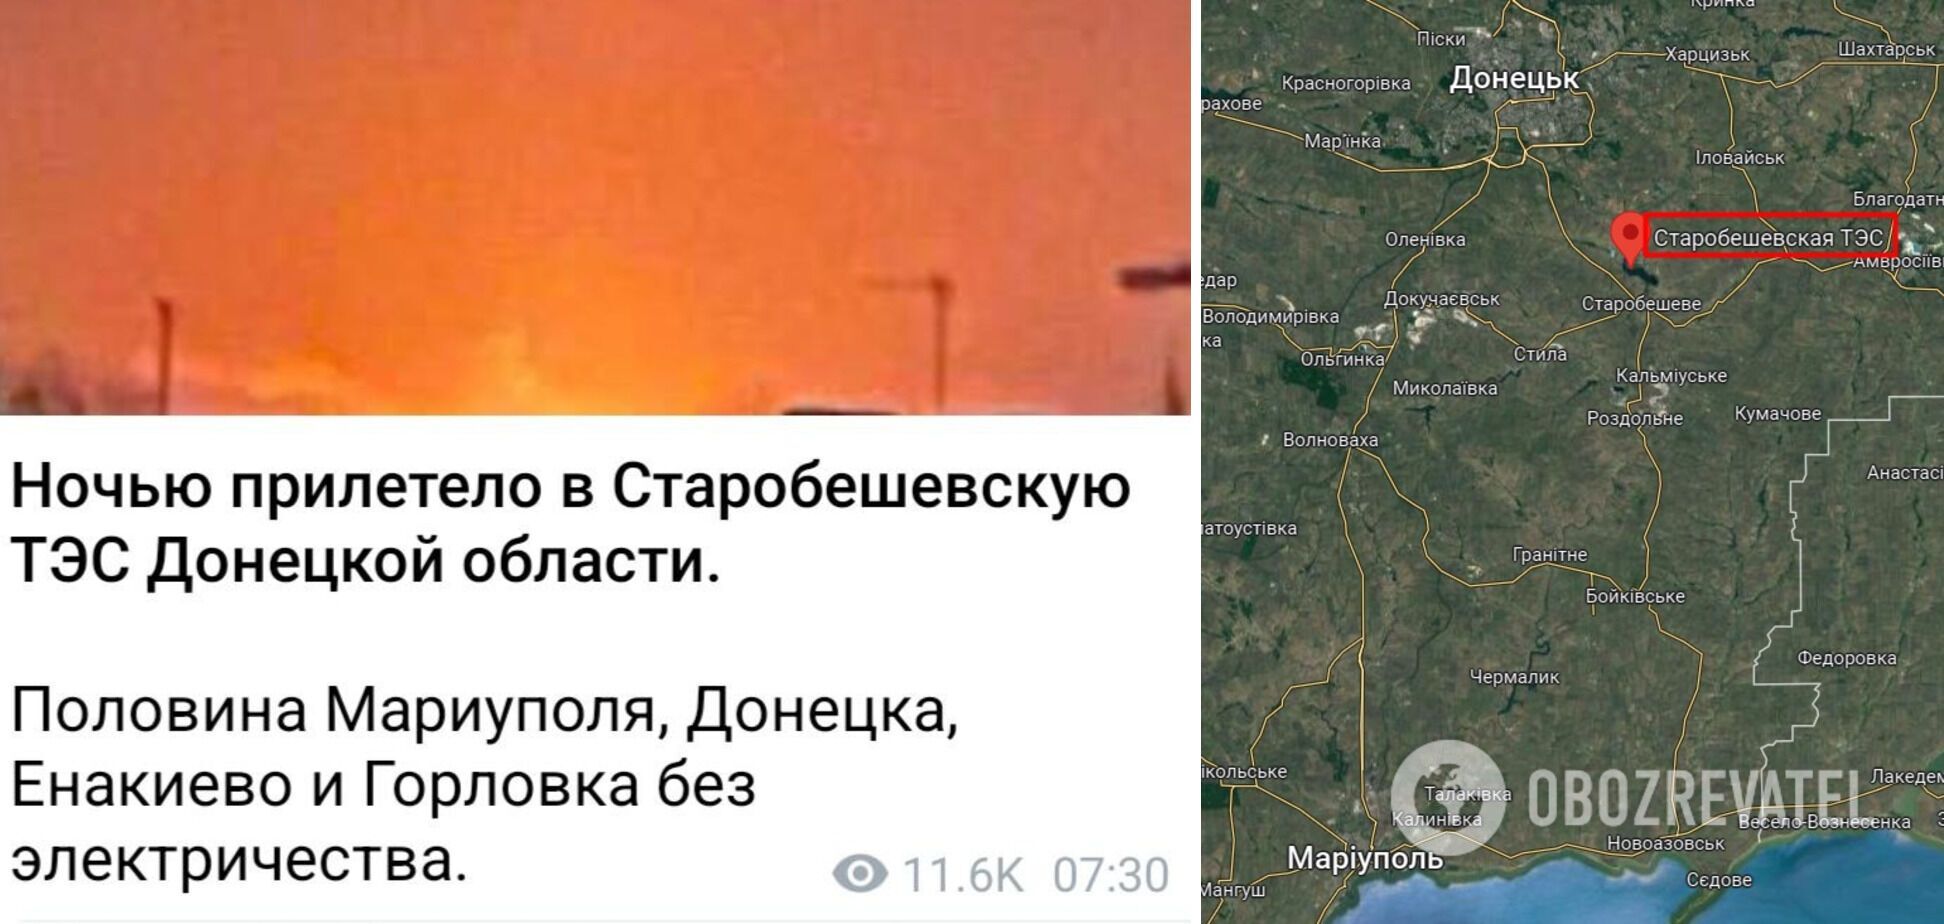 Part of Donetsk and Mariupol left without electricity after an accurate strike on Starobesheve TPP. Video